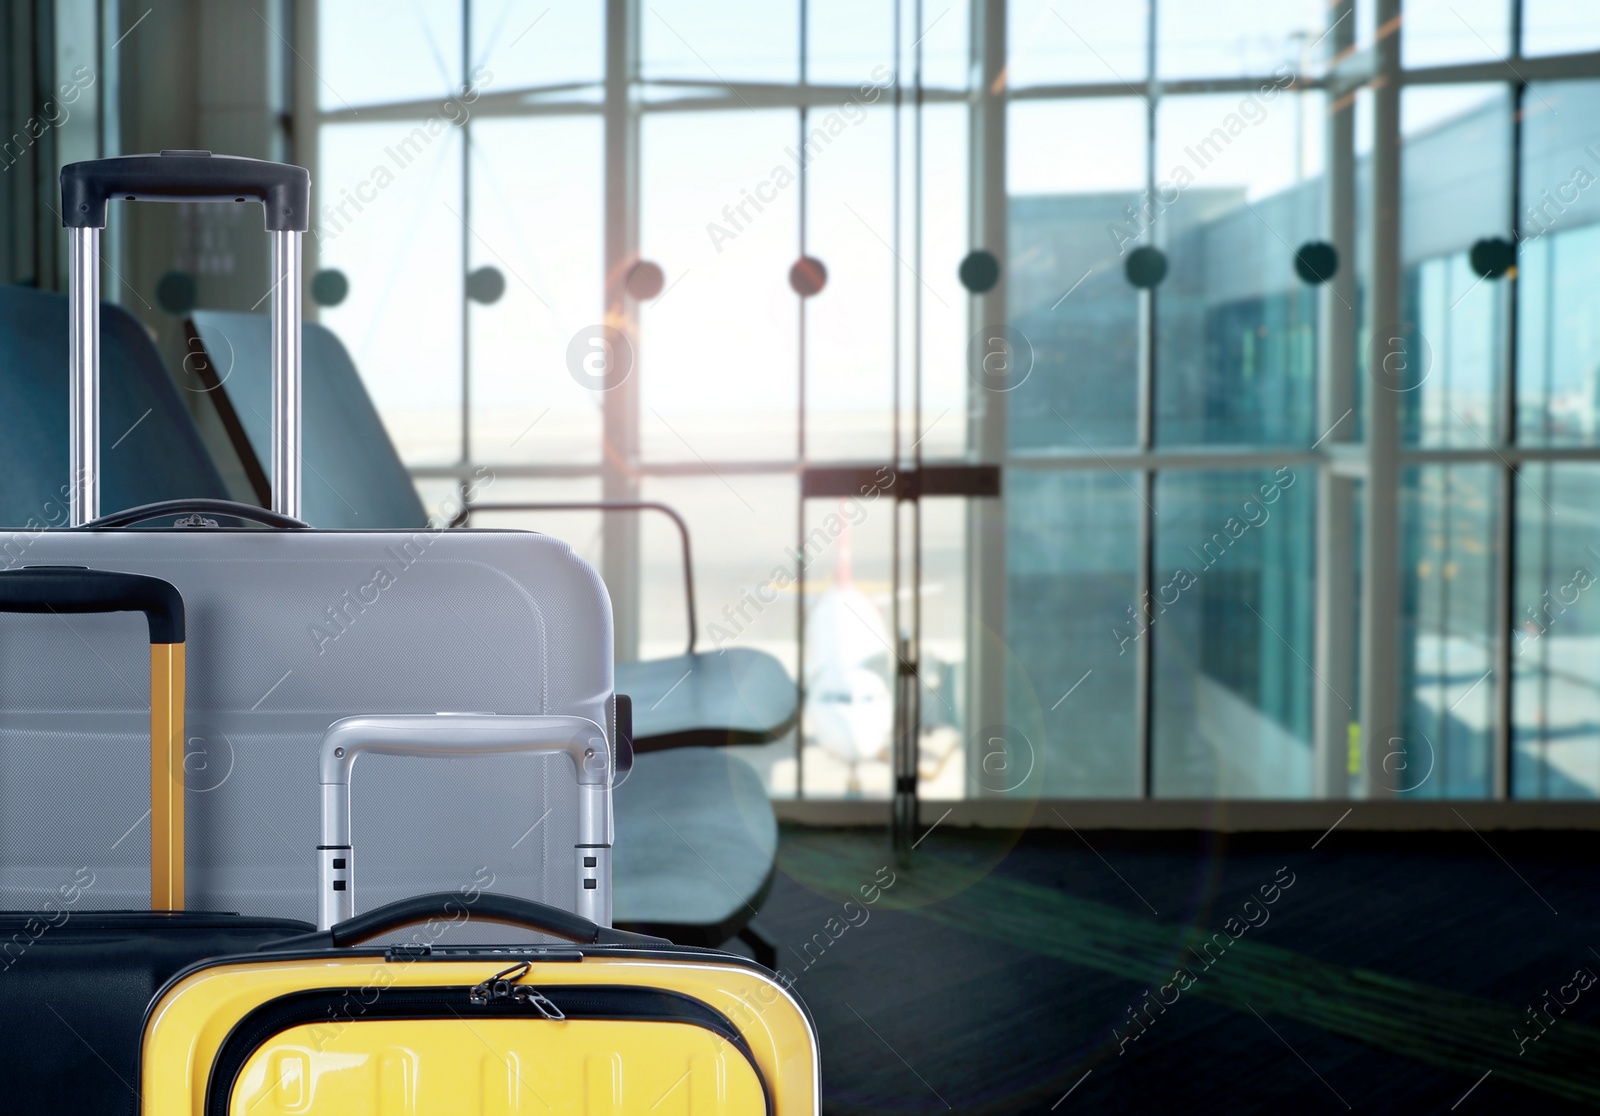 Image of Stylish suitcases in waiting area at airport terminal